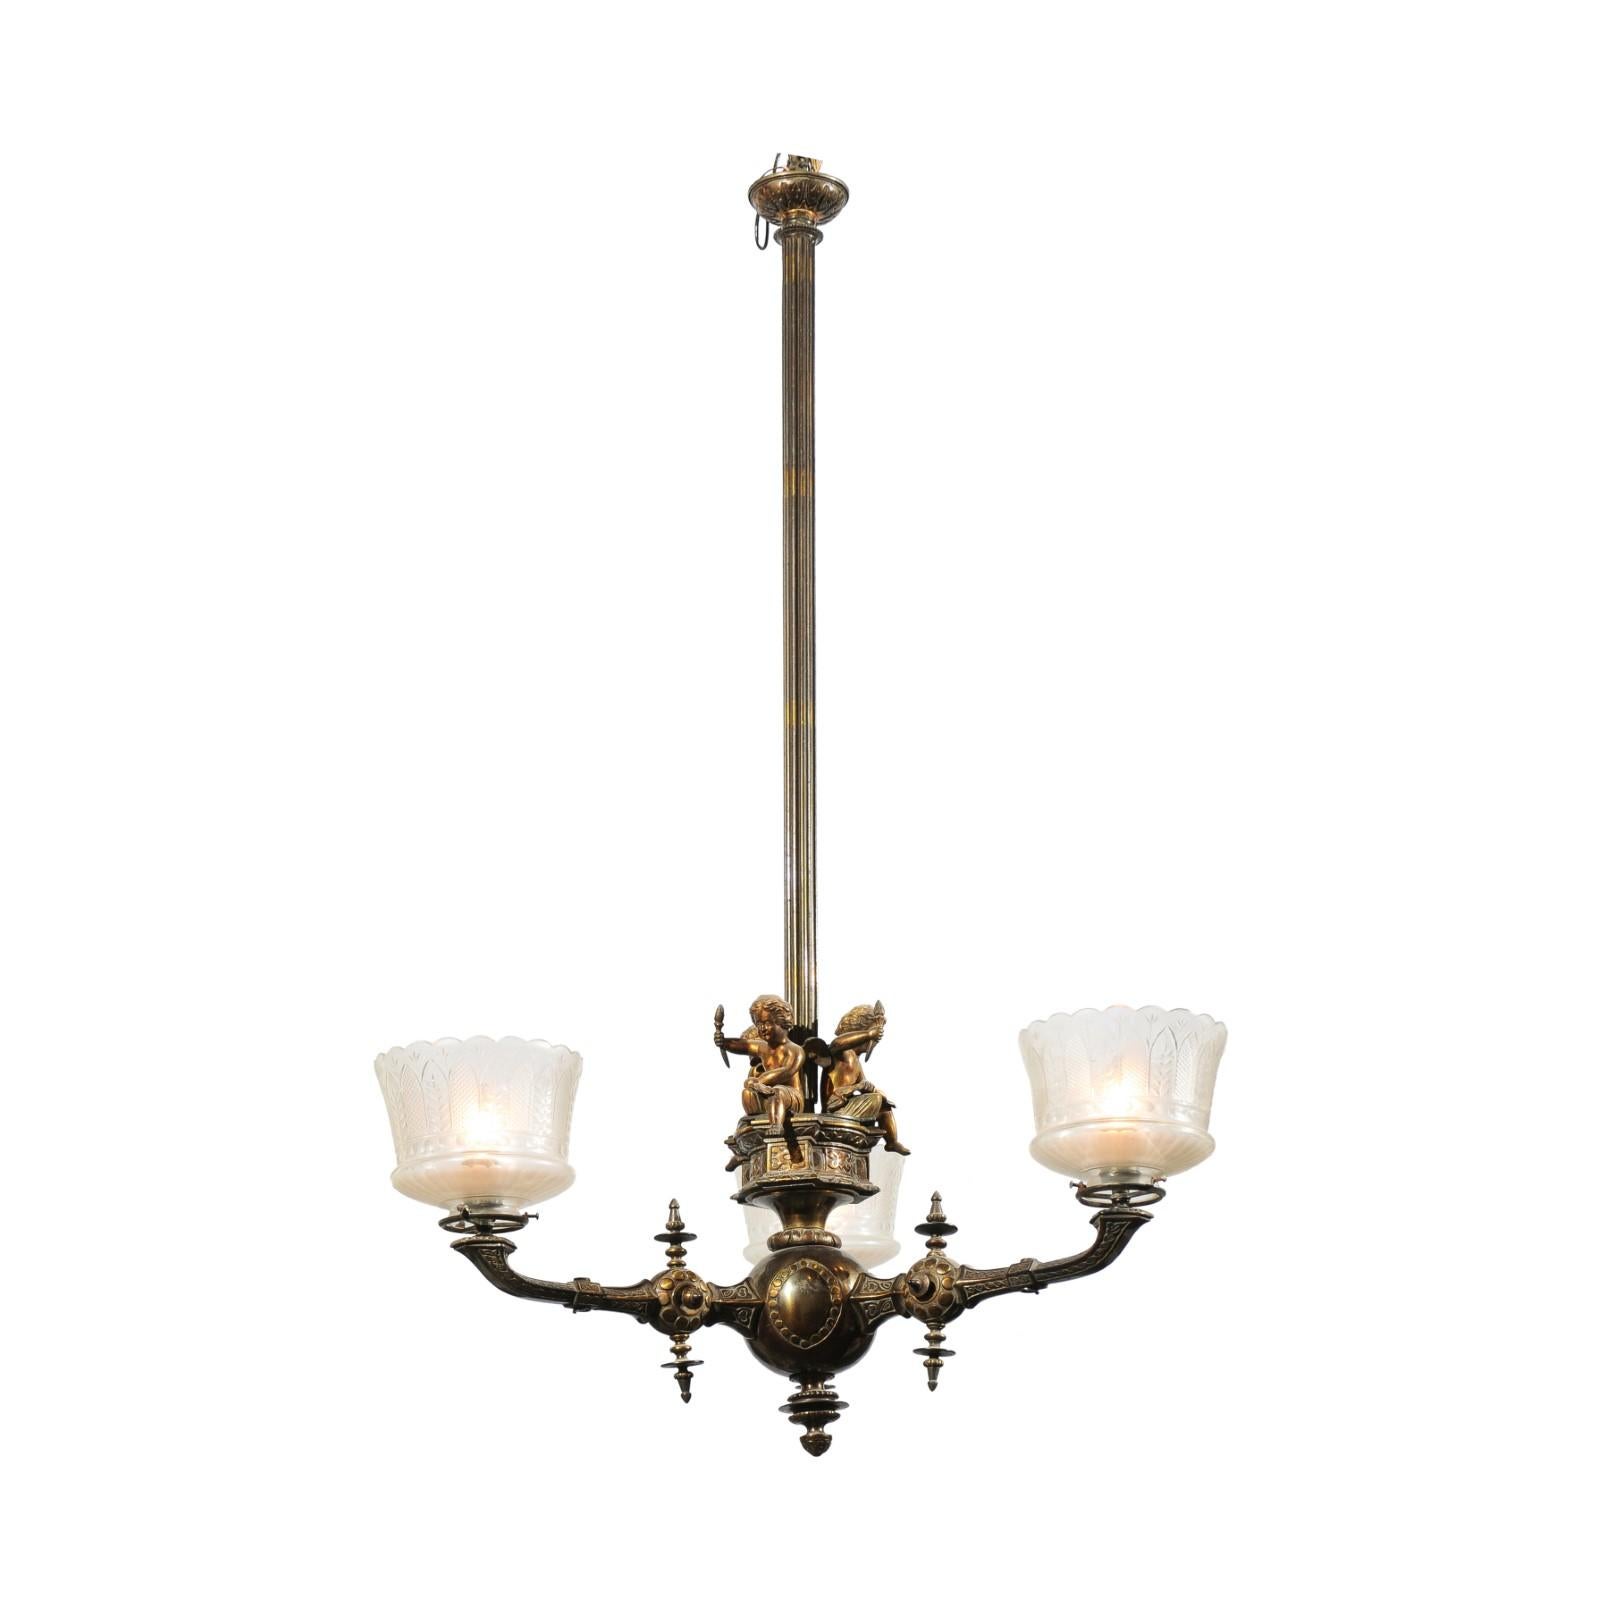 A French three-light bronze chandelier from the 19th century, with cherubs holding torches and Baccarat crystal gas shades. Born in France during the politically dynamic 19th century, this elegant chandelier features a central thin reeded staff